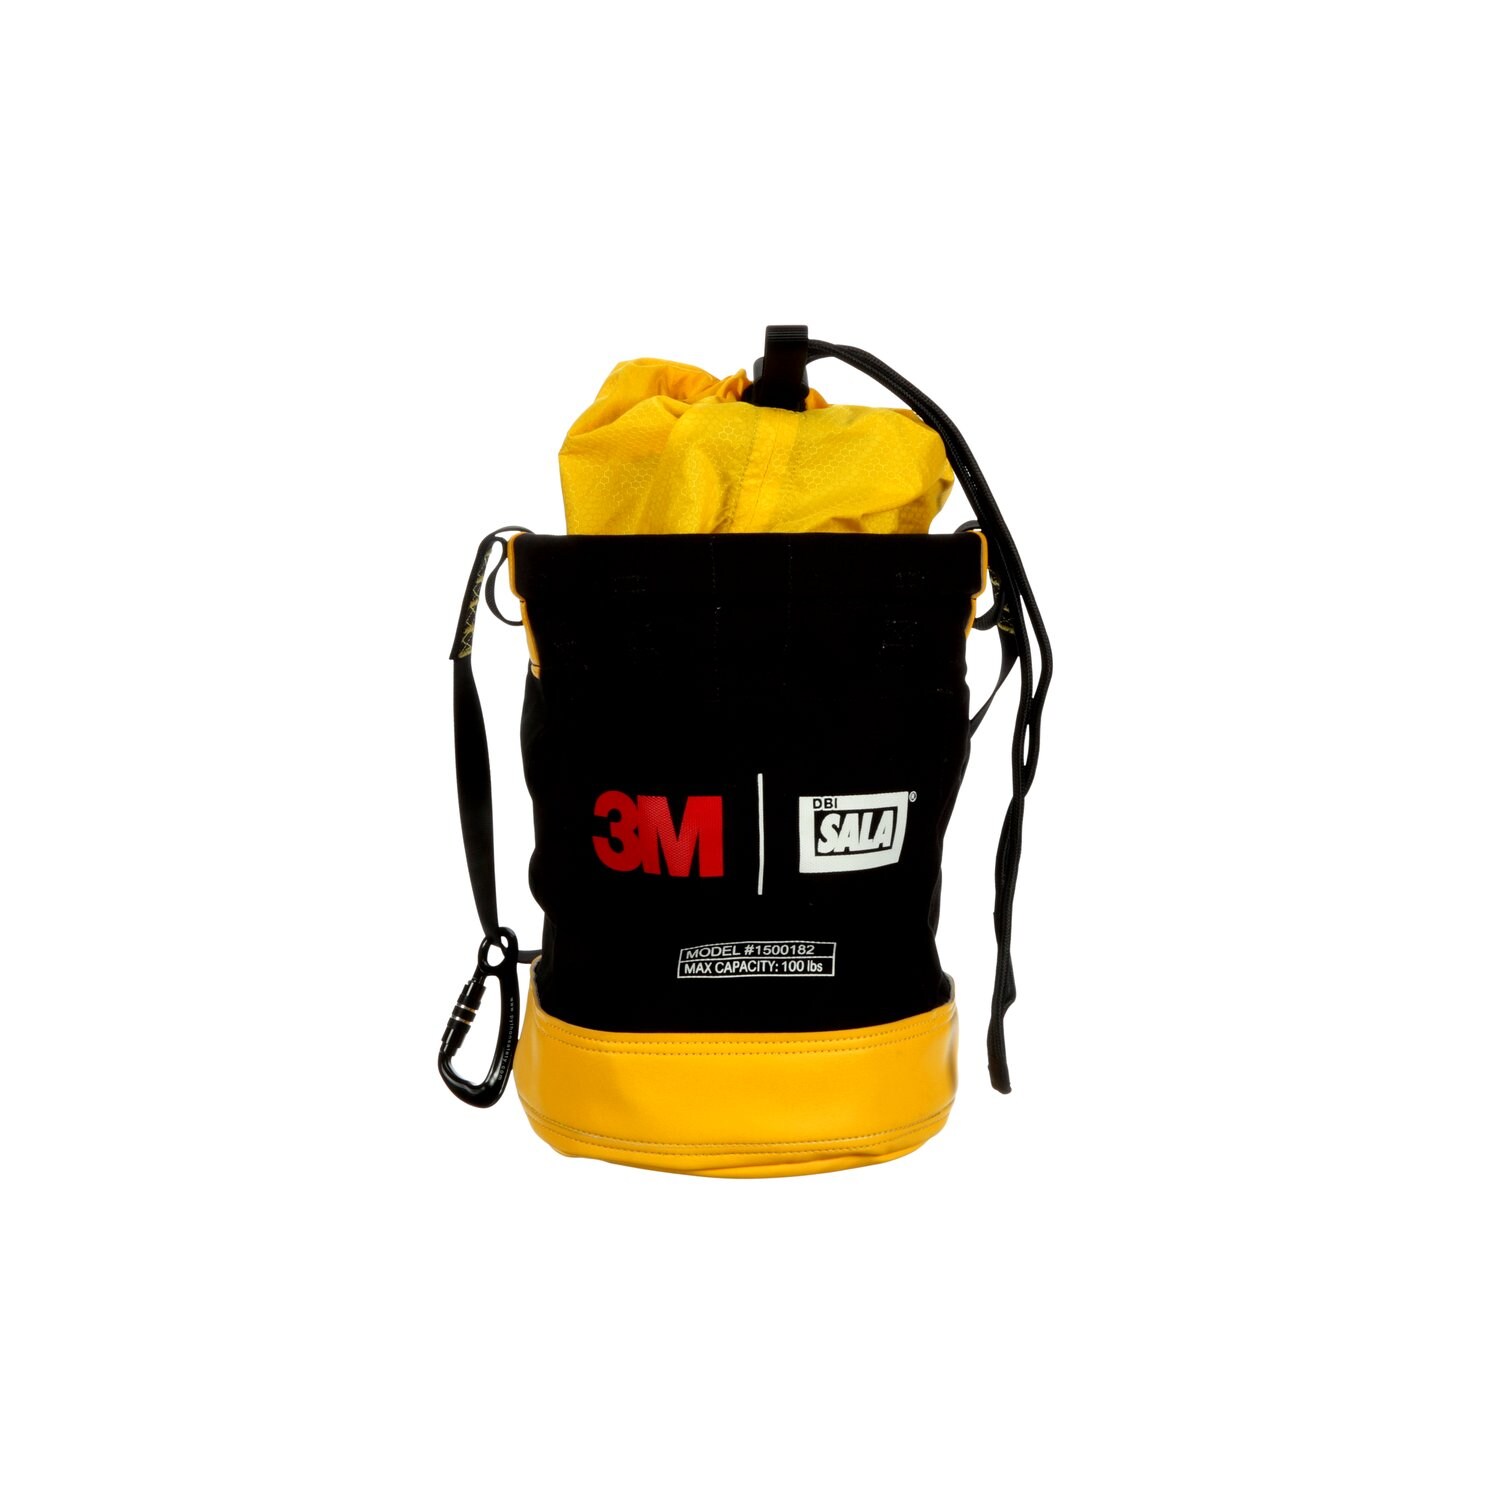 7012818198 - 3M Spill Control 2:1 Safe Bucket with Drawstring Closure 1500182, 100 lb Capacity, Canvas, 12.5 in dia x 16 in